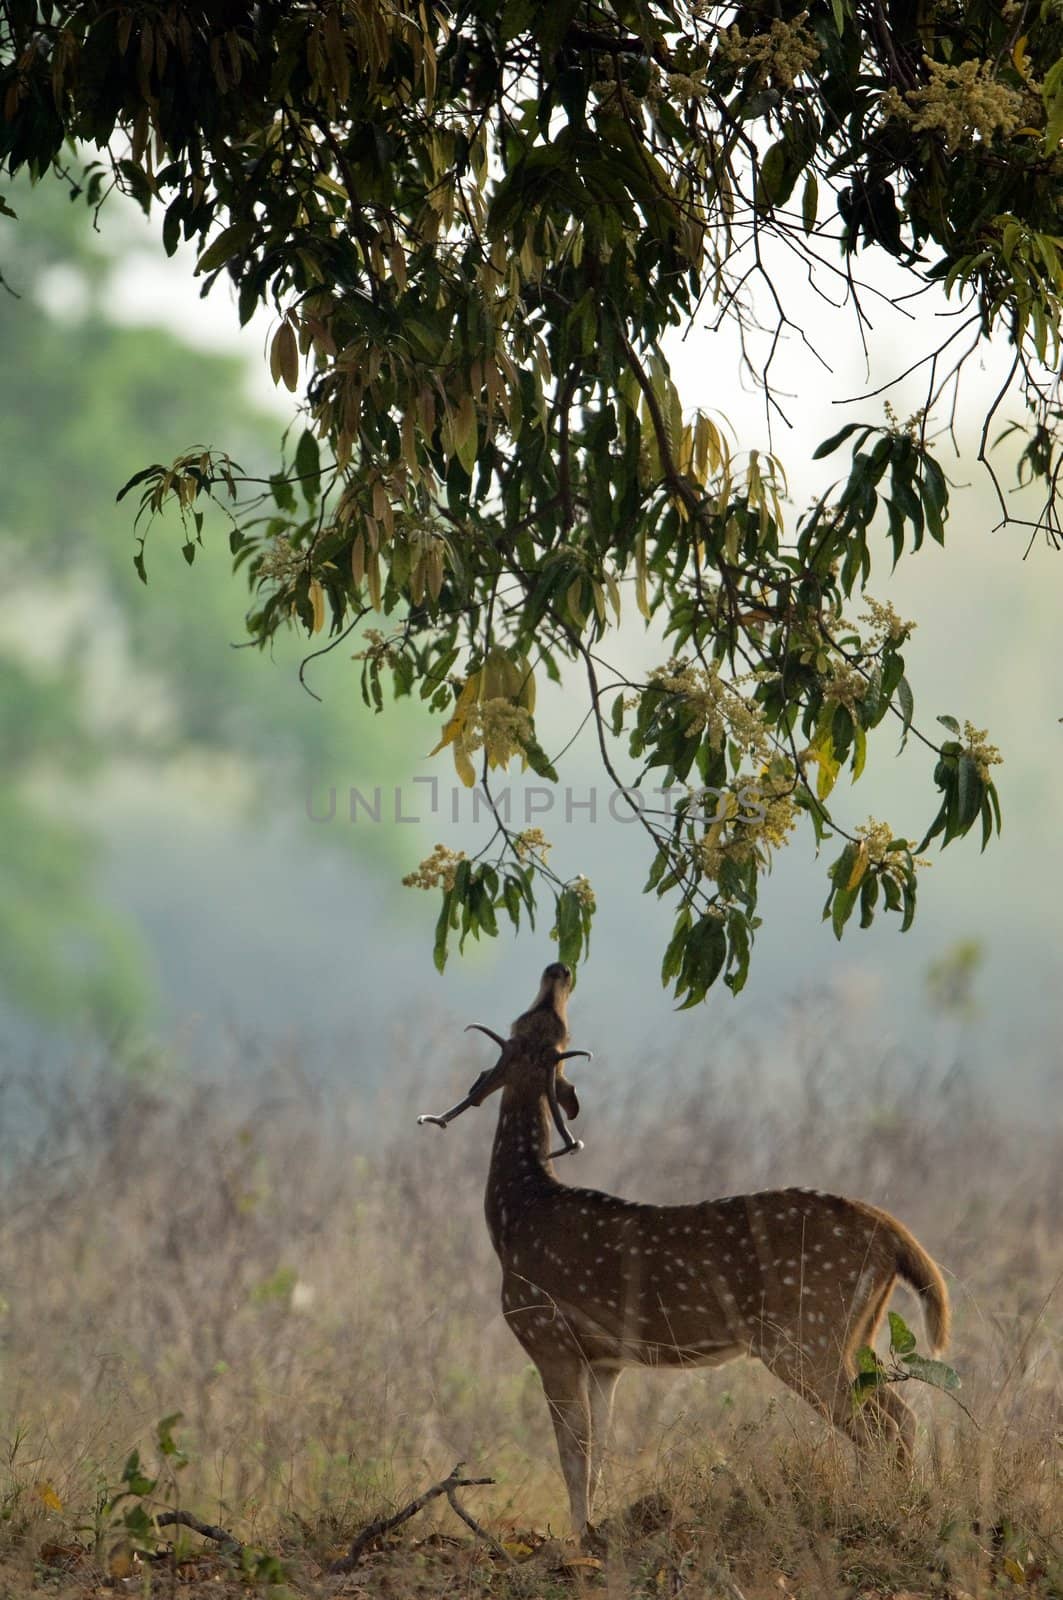 The red deer has lifted a head and eats tree leaves. Early morning. Bandhavgarh. India.